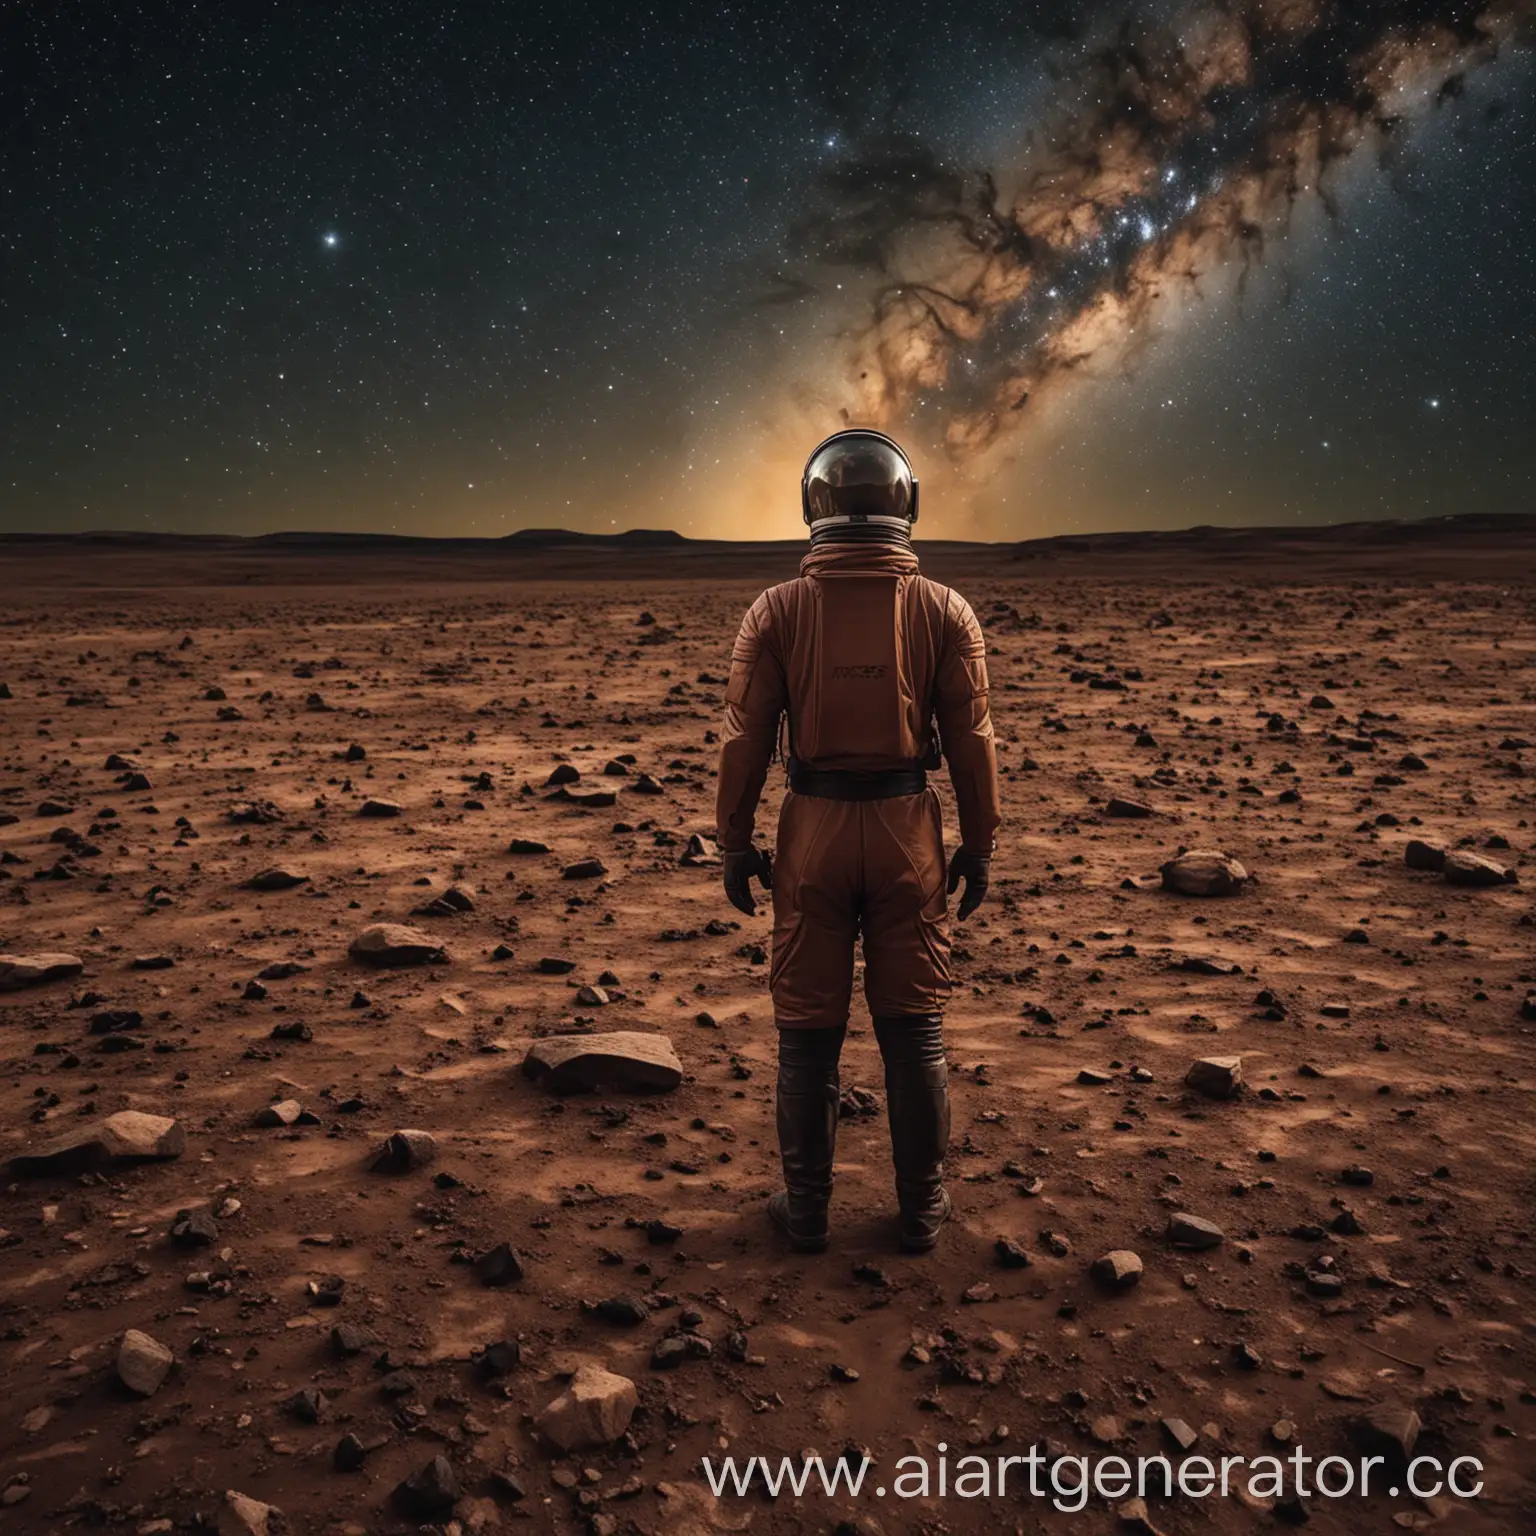 Man-in-Field-Under-a-Starlit-Sky-with-Mars-in-the-Background